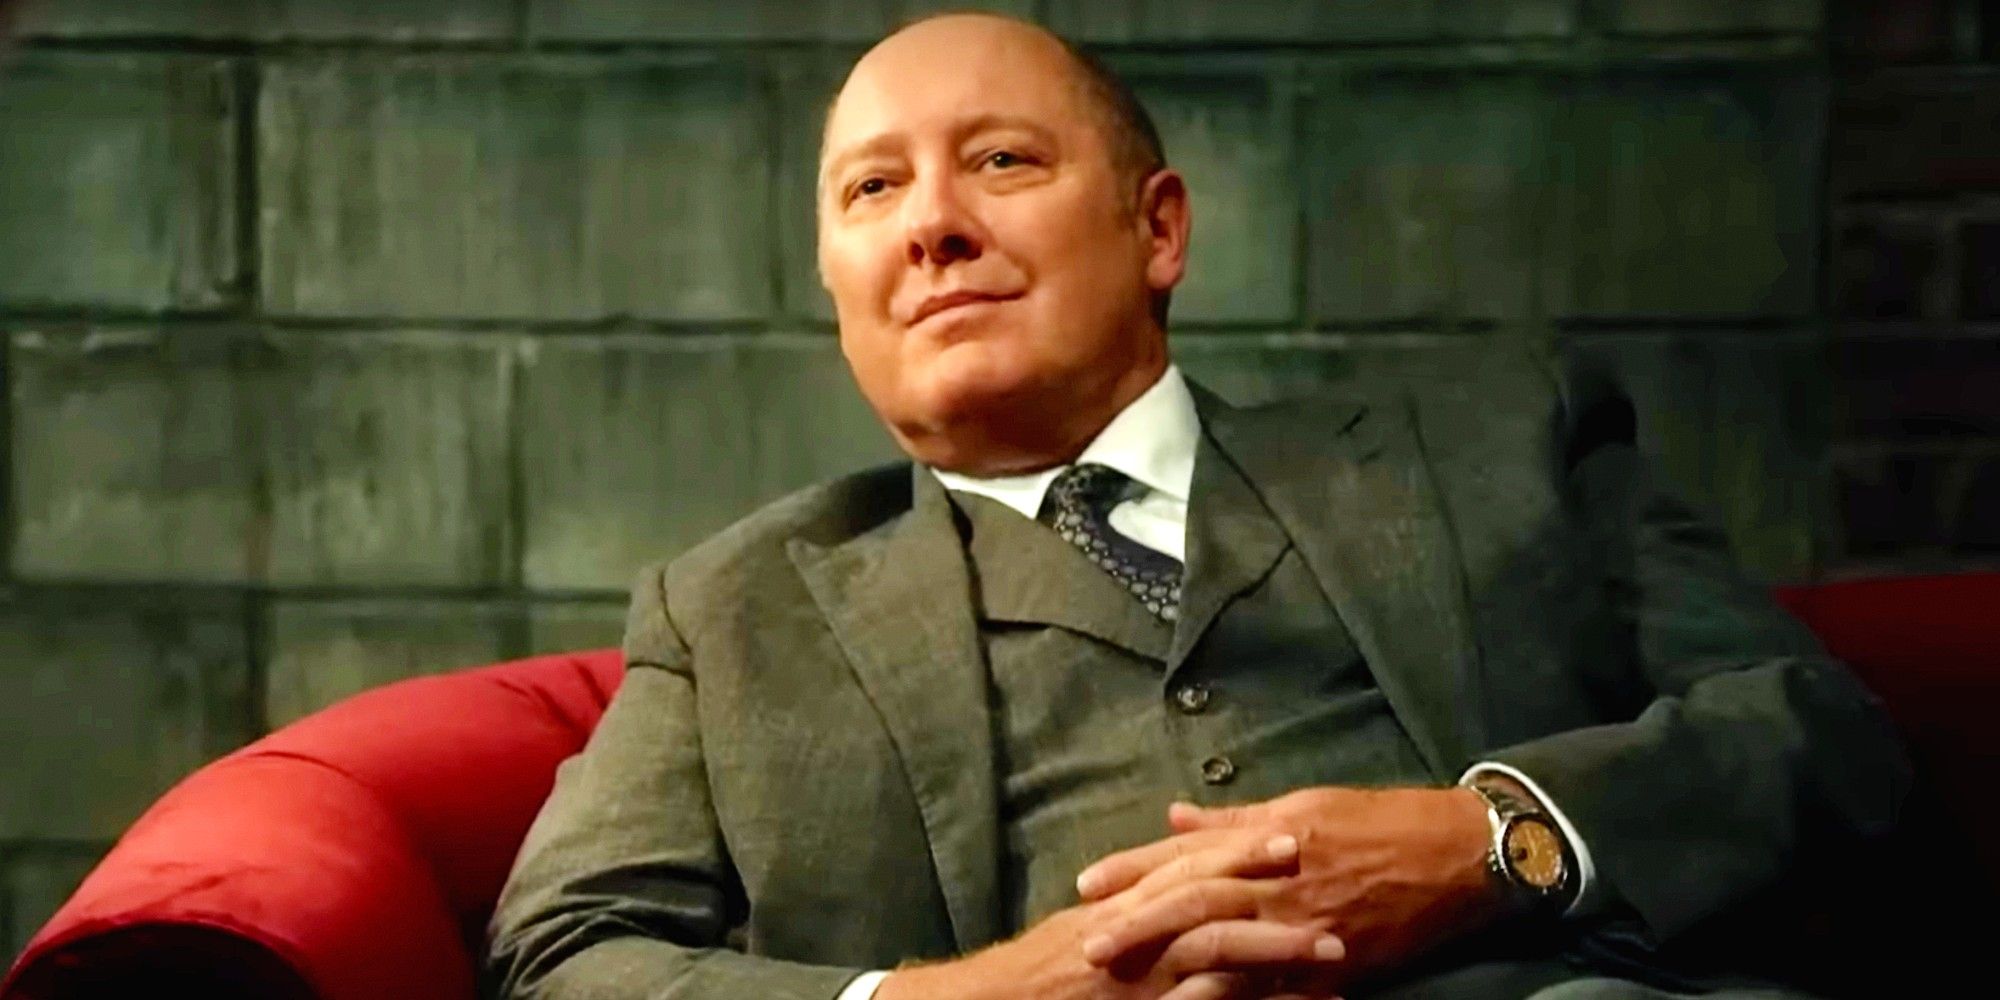 James Spader in The Blacklist sitting in a plush red chair with his fingers laced in his lap